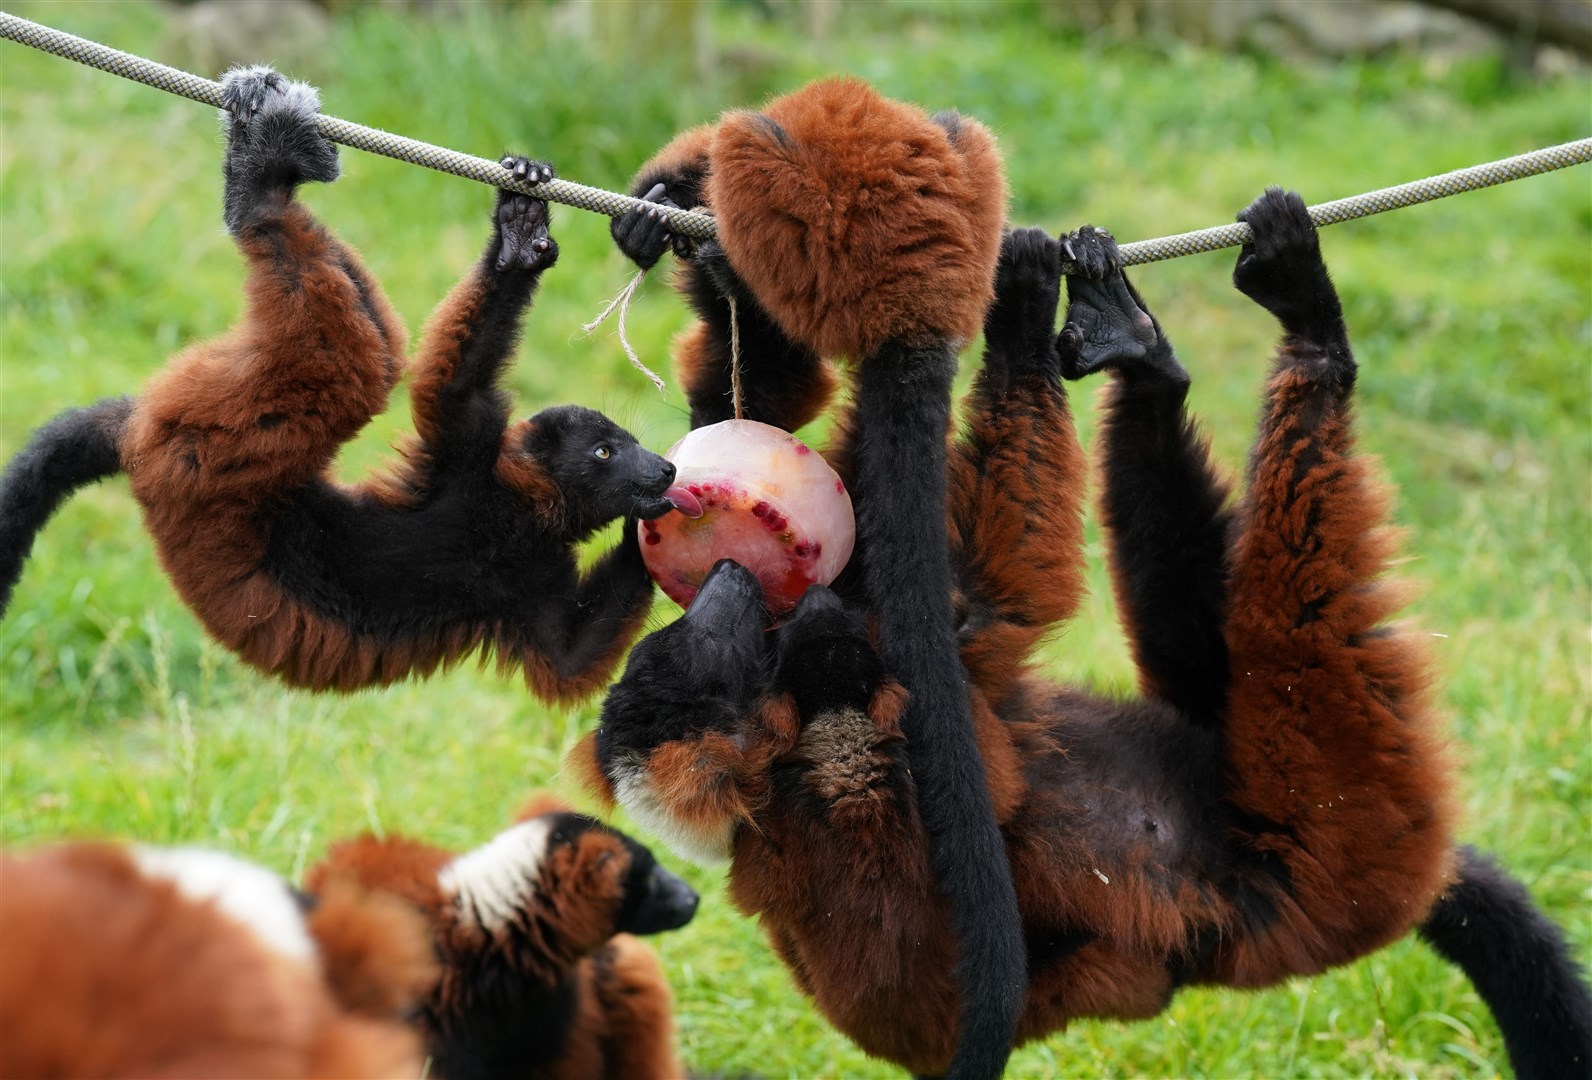 The lemur’s pals join in the fun (Andrew Milligan/PA)